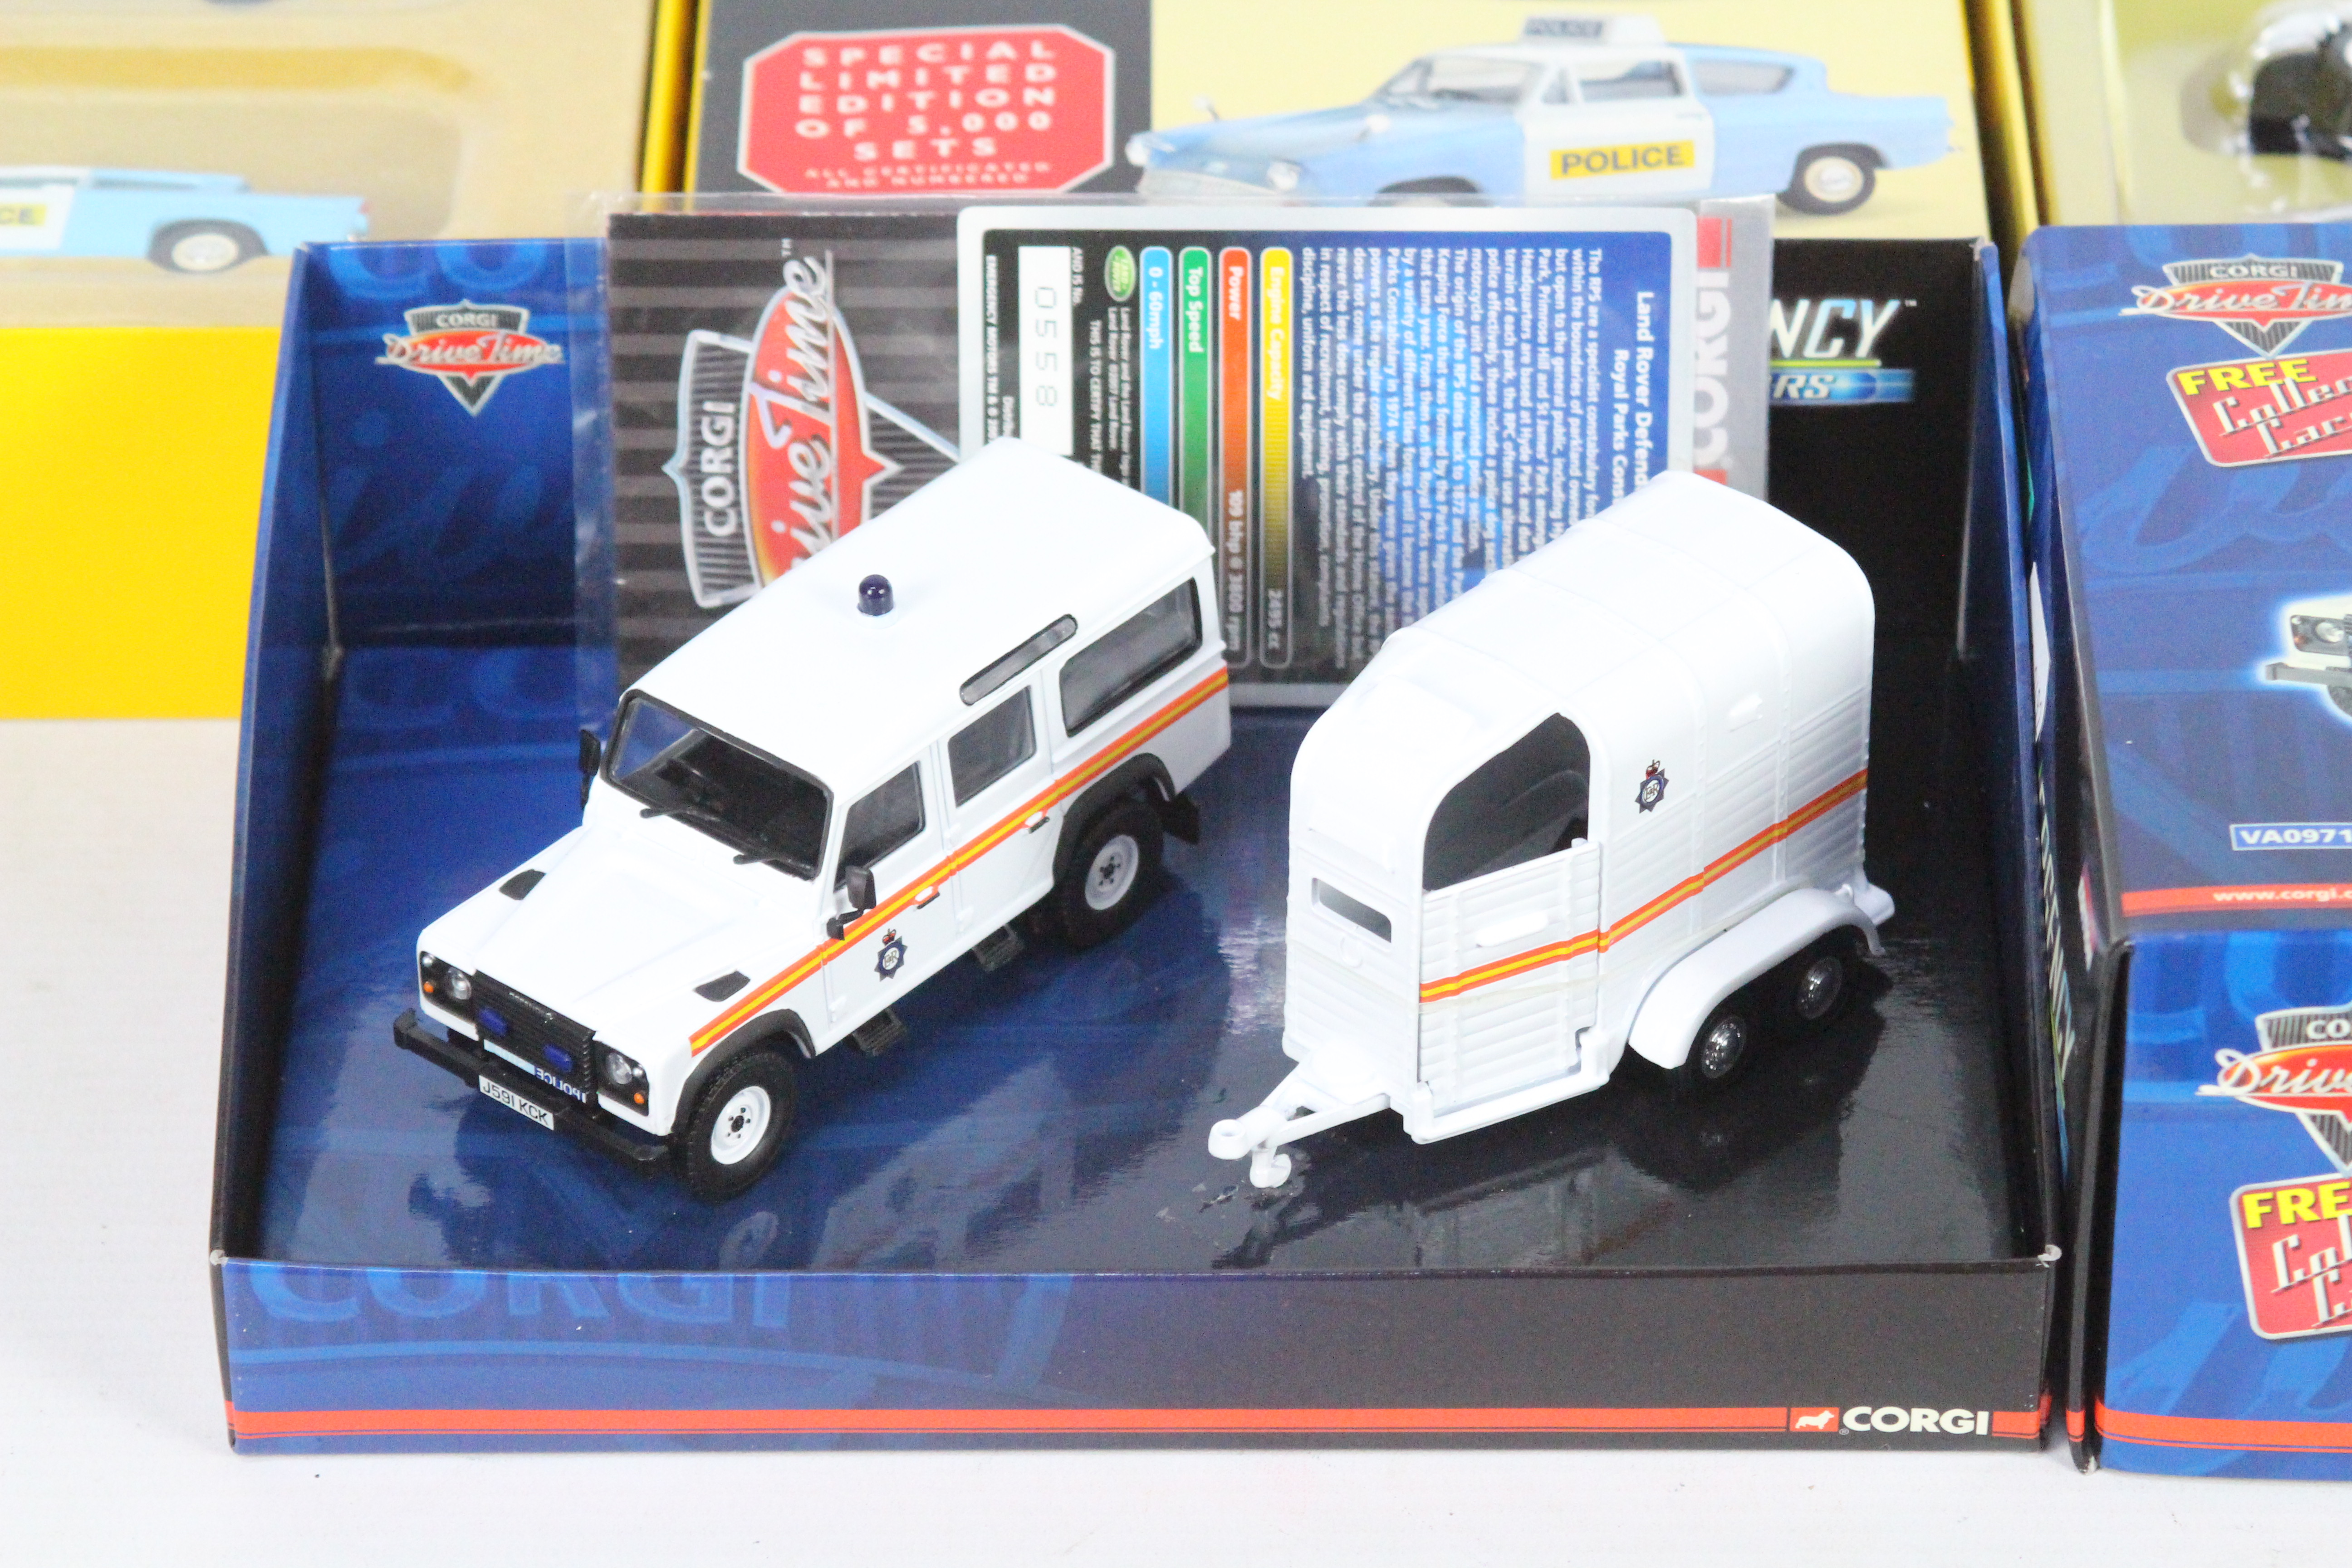 Vanguards - Five boxed Vanguards Limited Edition diecast model Police / emergency vehicle sets. - Image 4 of 4